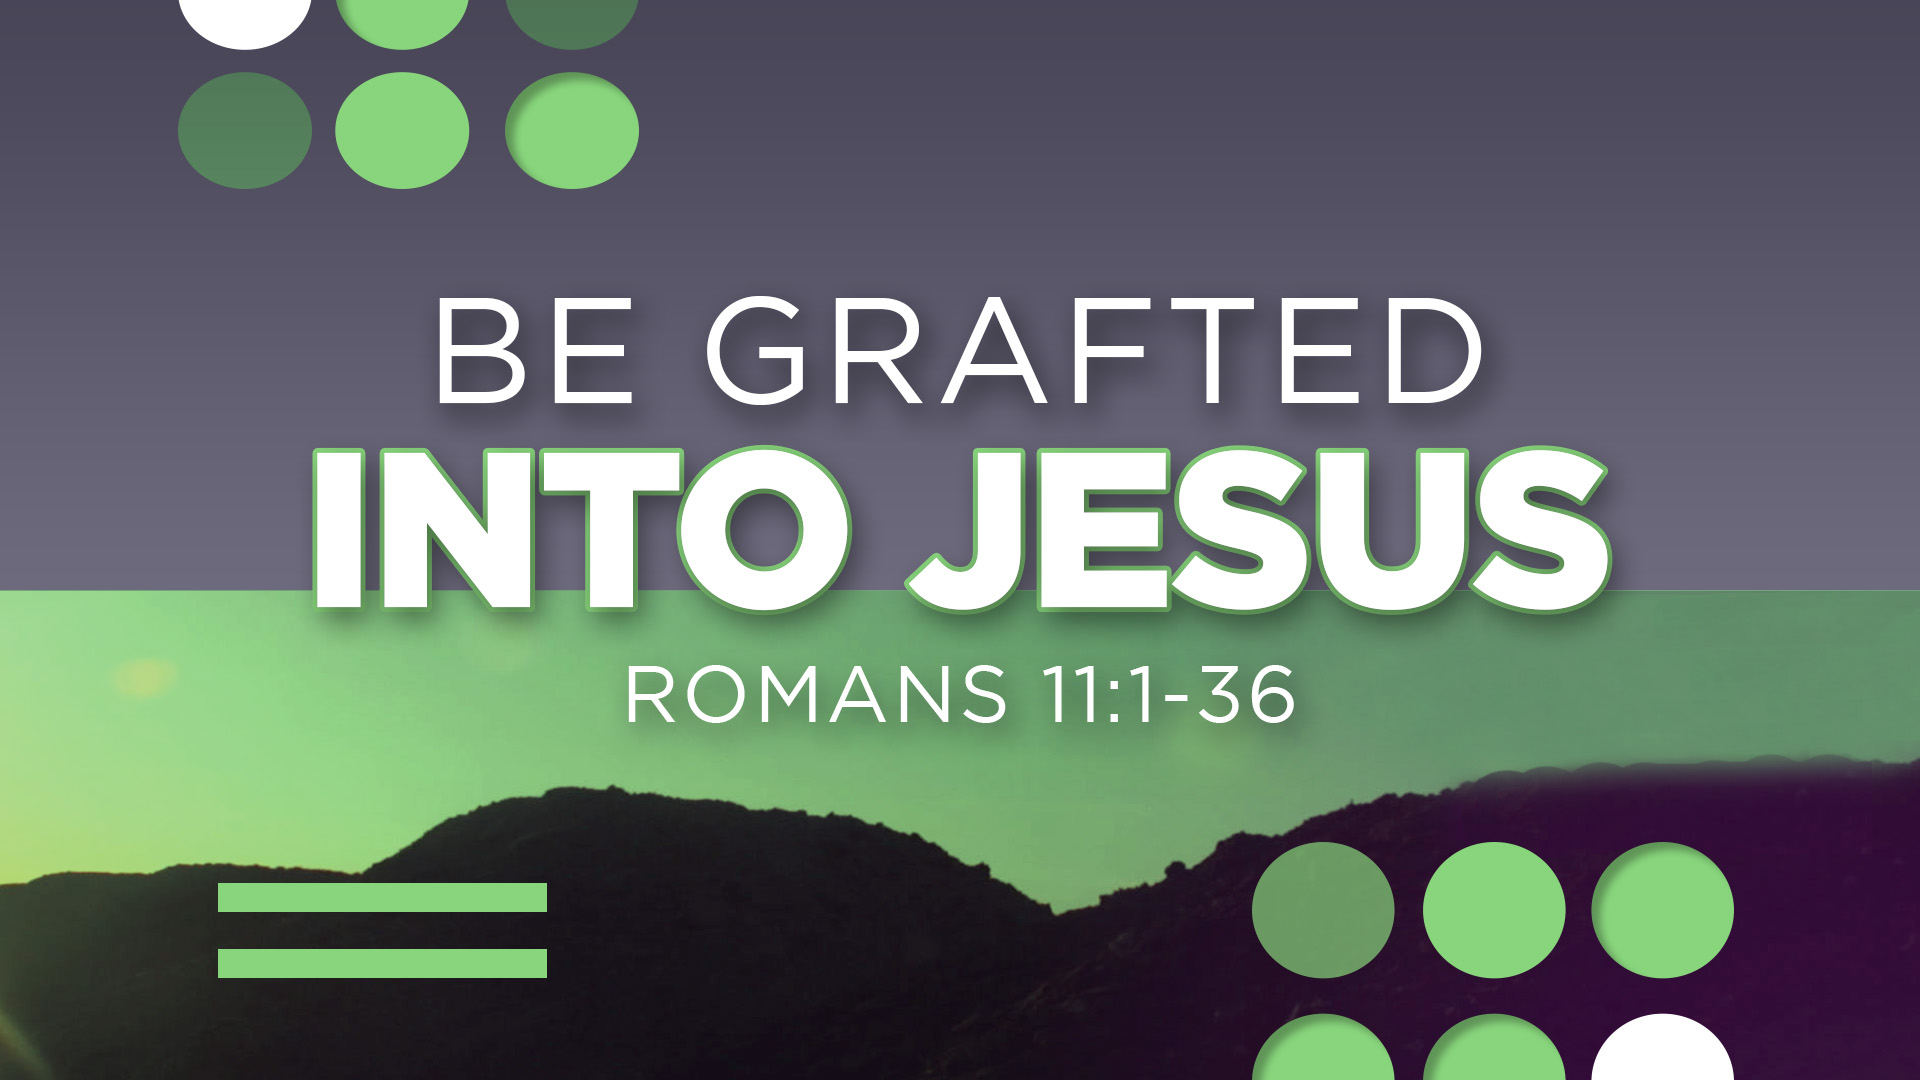 Be Grafted into Jesus